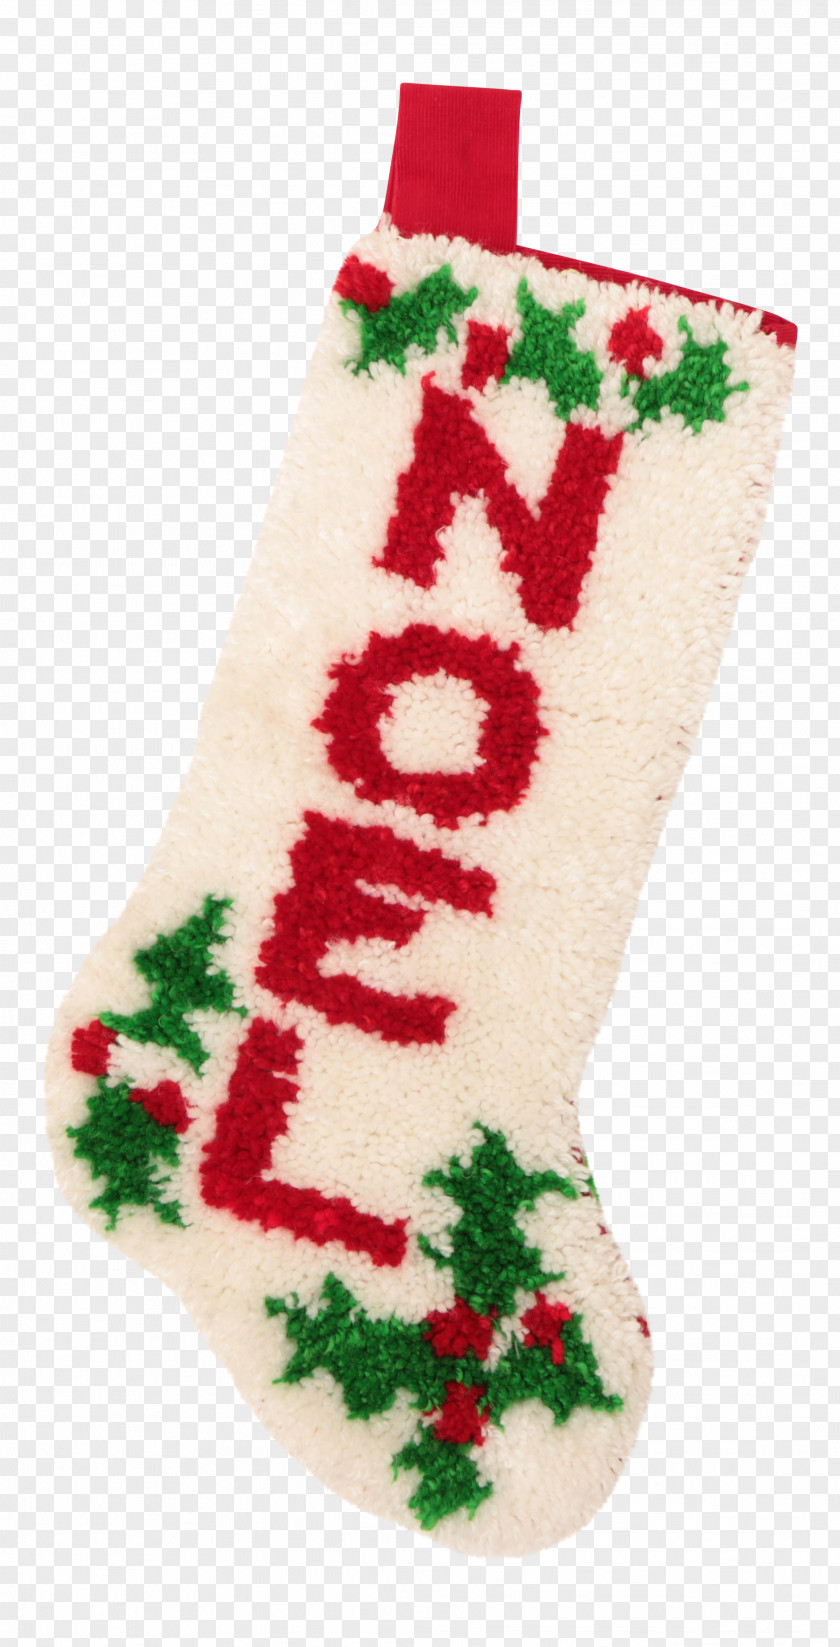 Christmas Stocking Decoration Stockings Ornament PNG